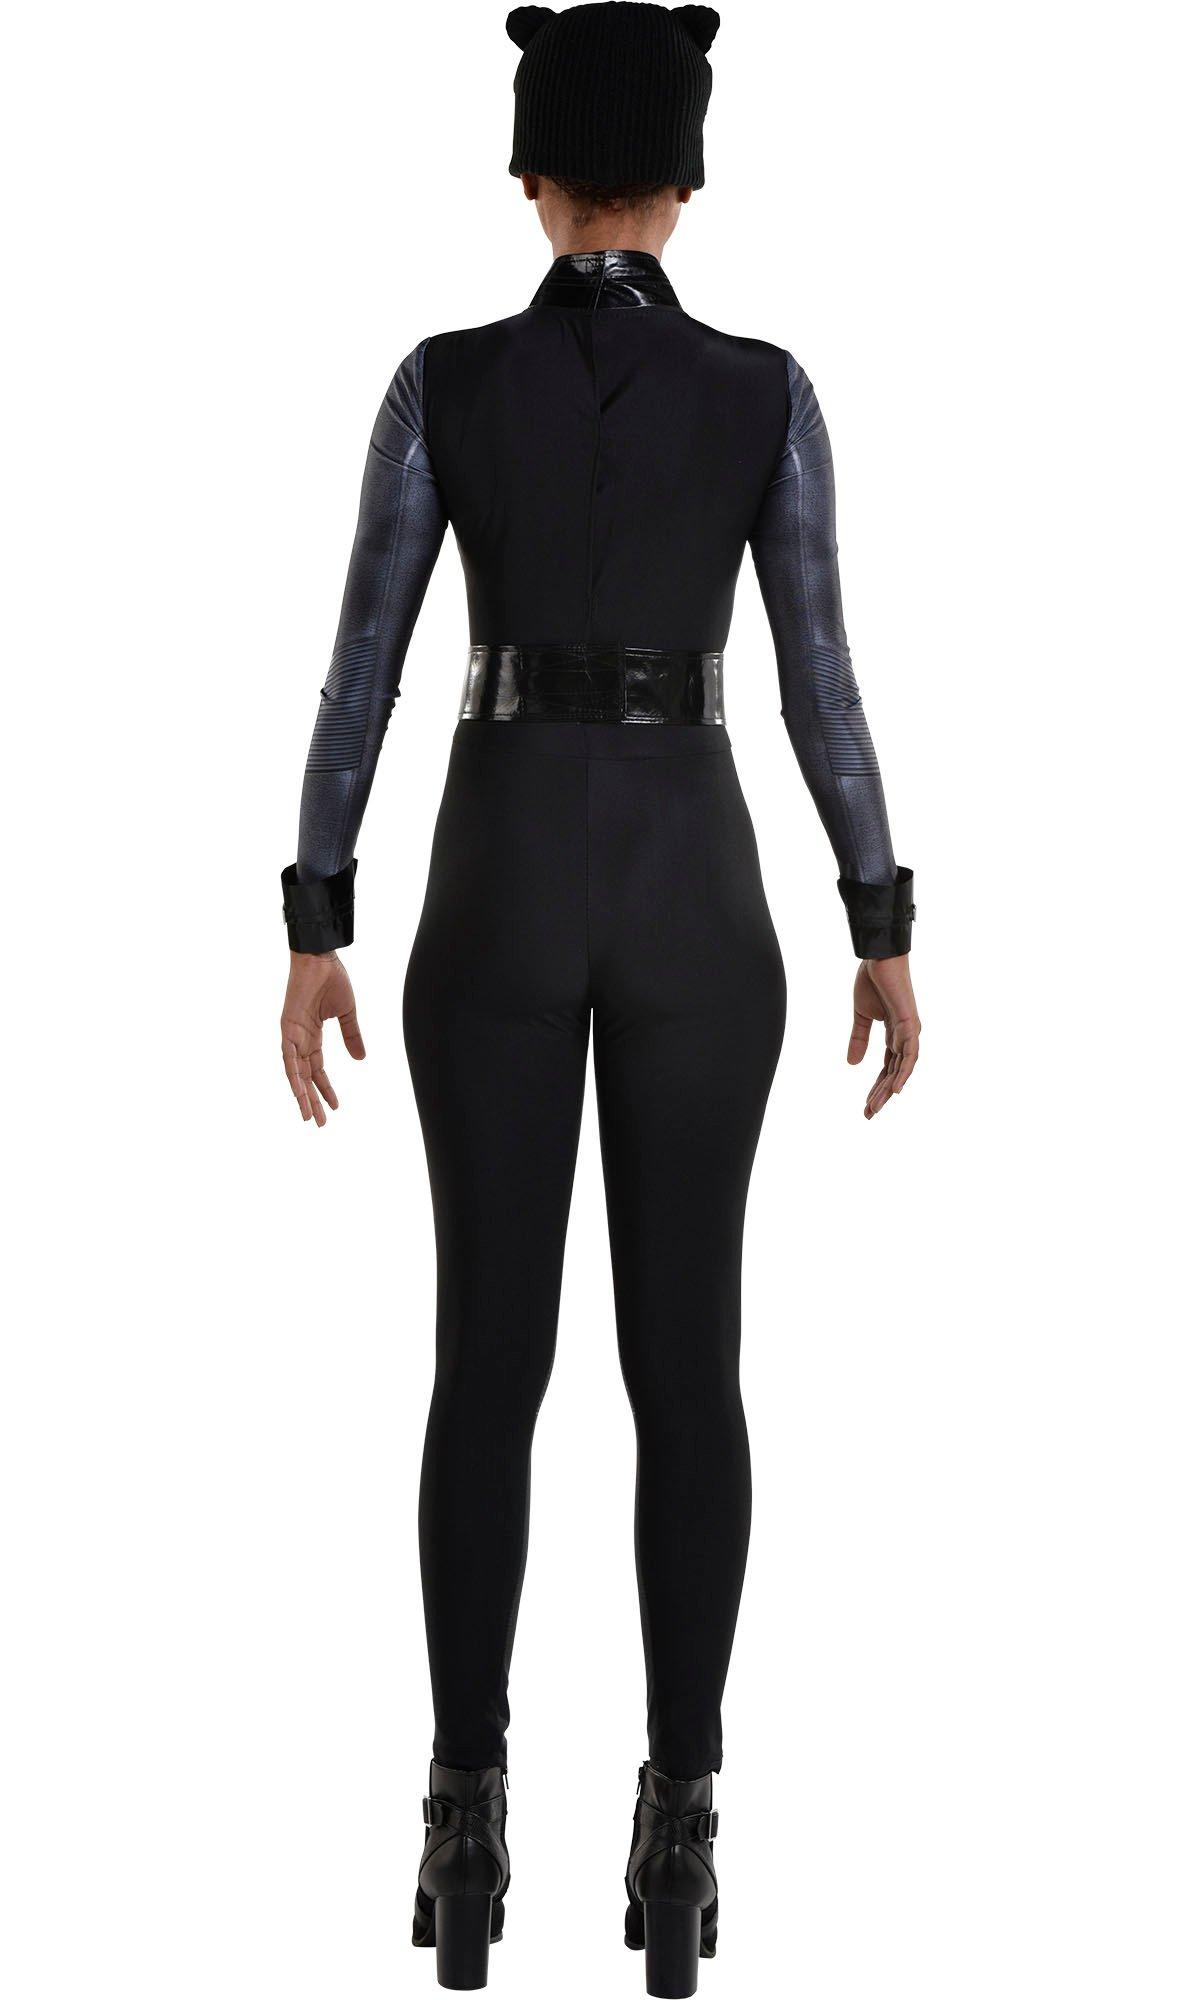 Womens Deluxe Captivating Catwoman Costume [85554-CW] - Struts Party  Superstore